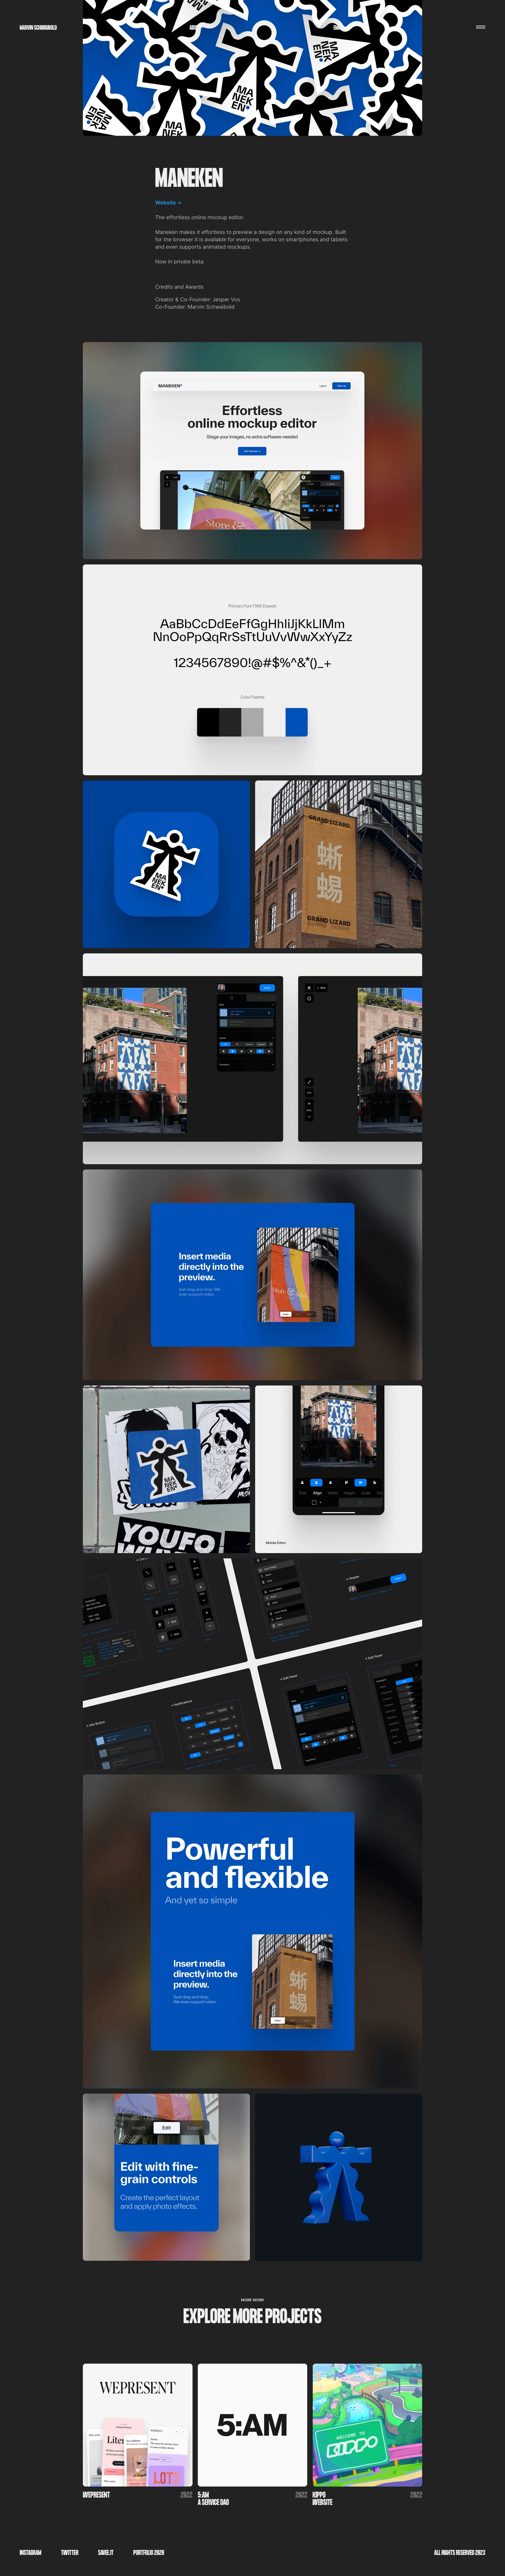 Marvin Schwaibold Landing Page Example: German visual designer living in New York City.